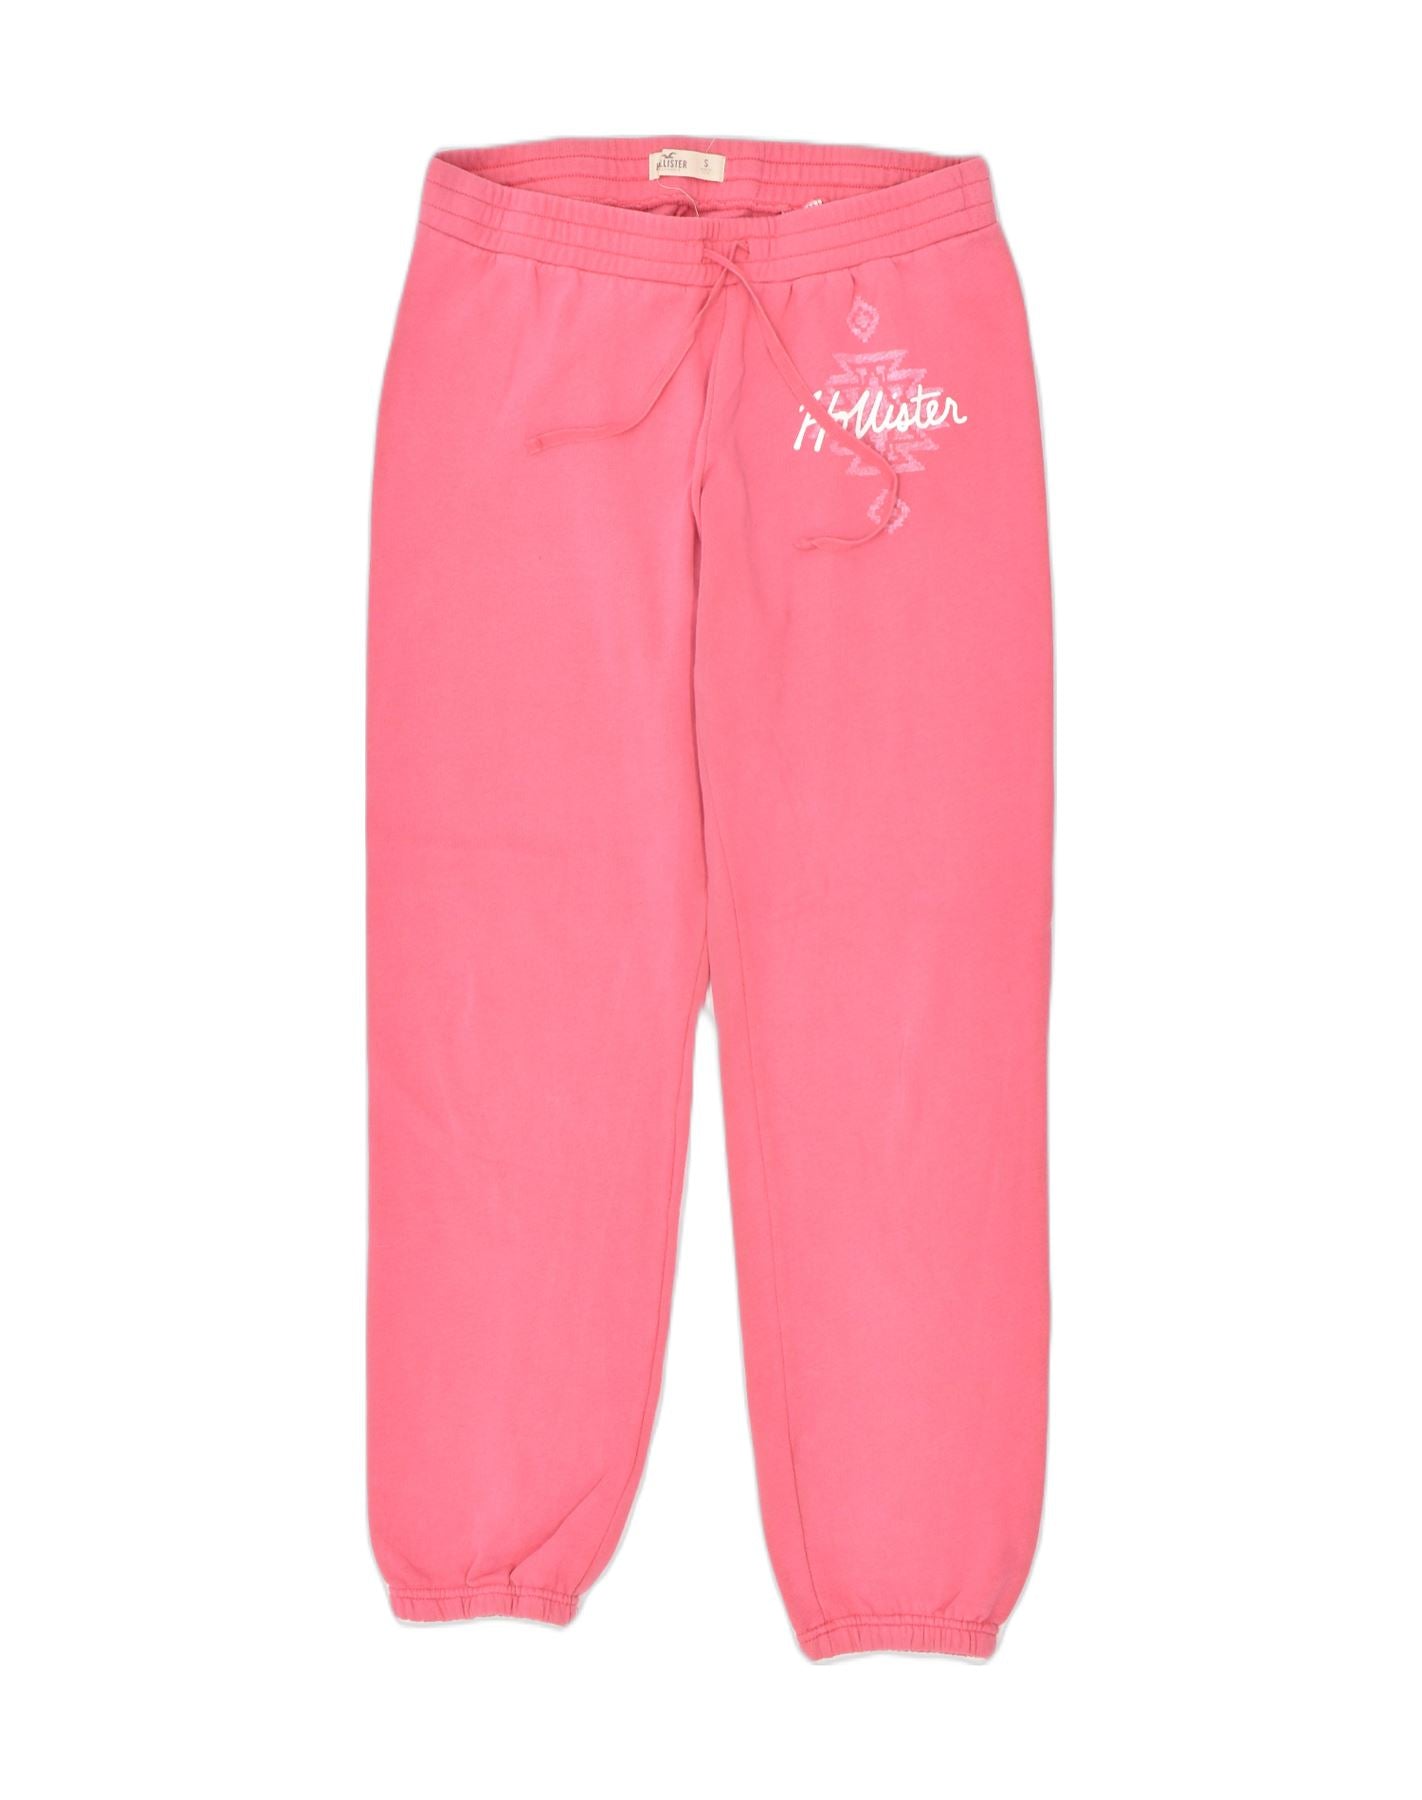 HOLLISTER Womens Tracksuit Trousers Joggers UK 10 Small Pink